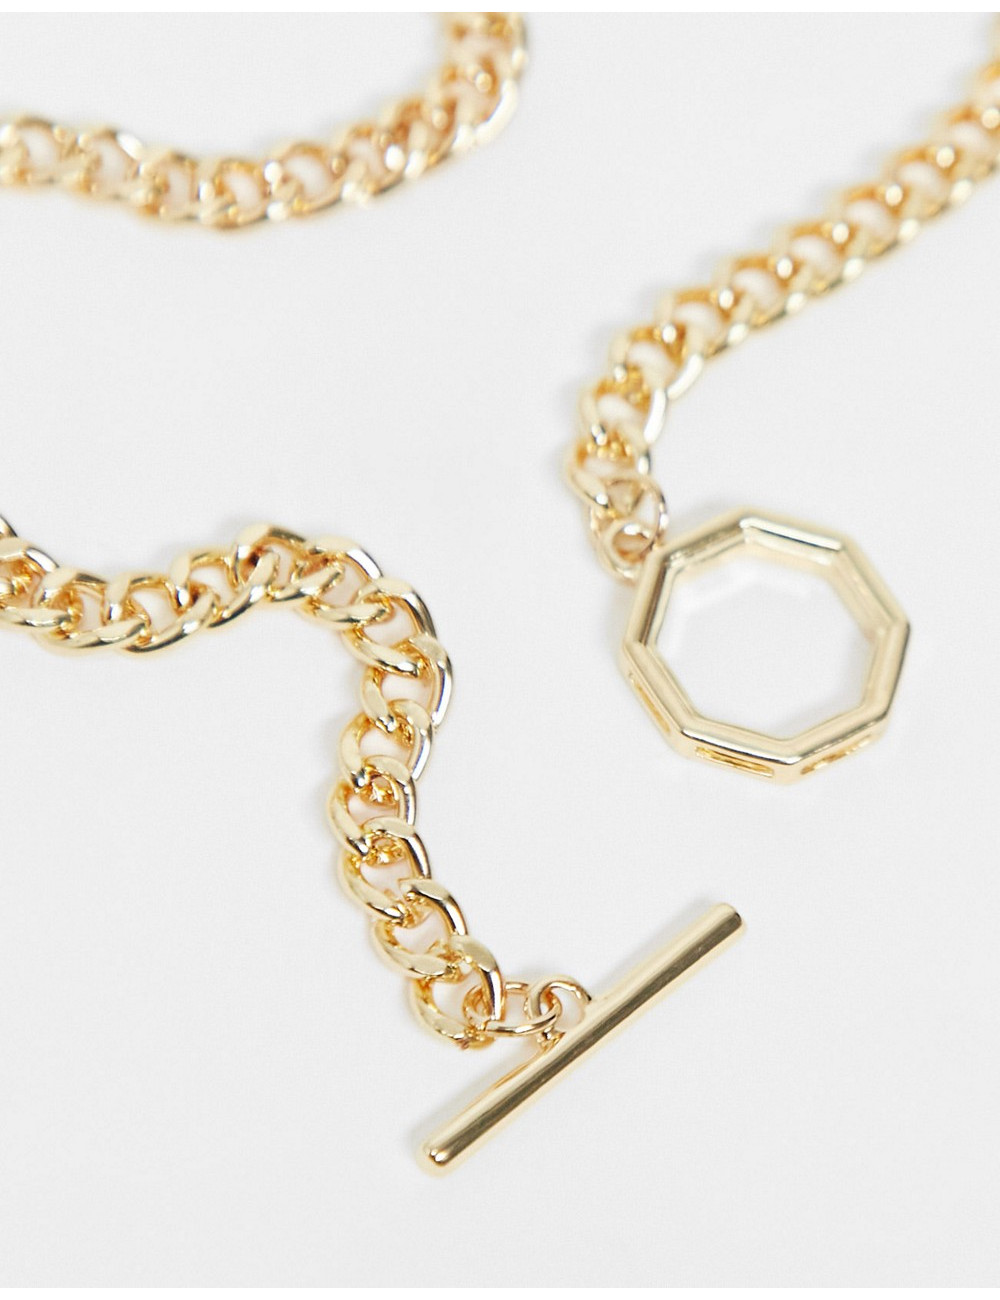 DesignB chain necklace in gold